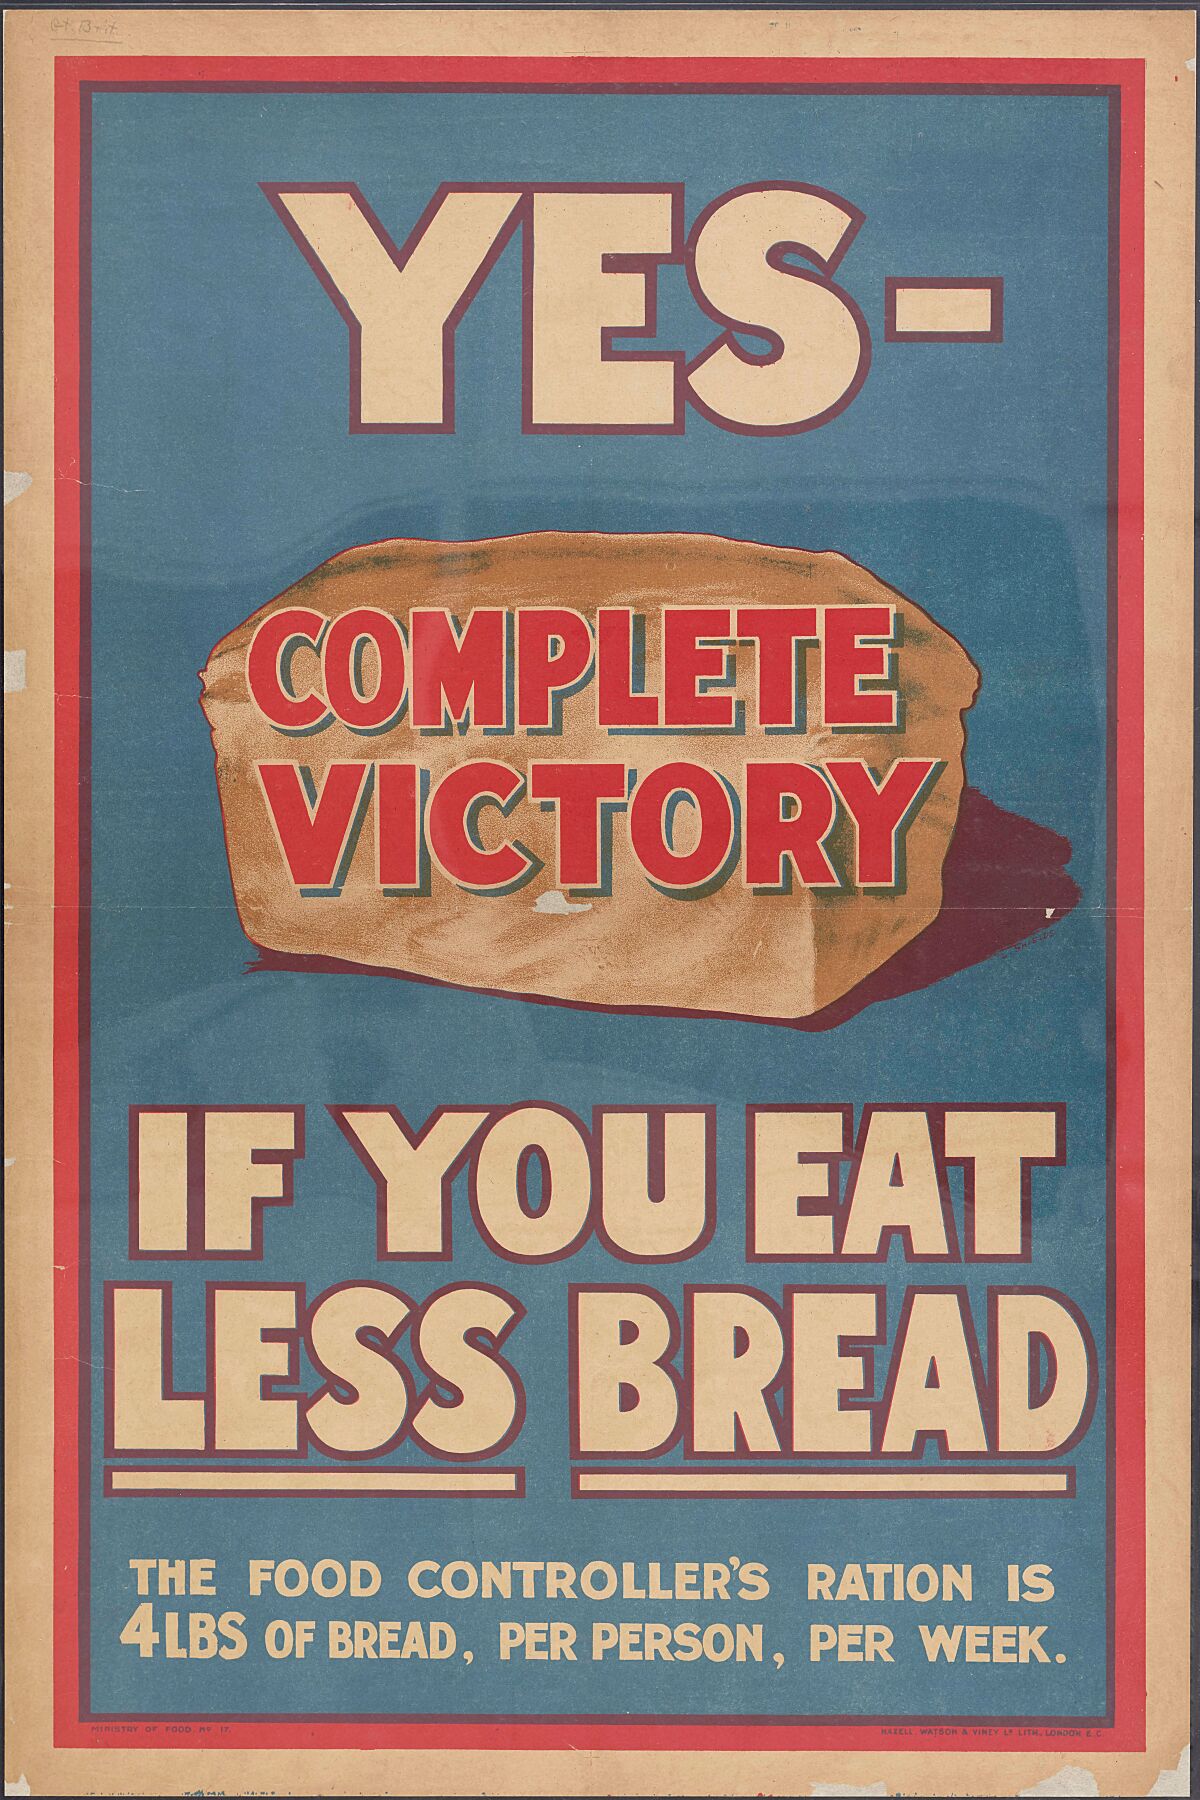 Yes - Complete victory if you eat less bread - the food Controller's ration is 4 lbs. of bread, per person, per week by Shields, L Publication date 1918